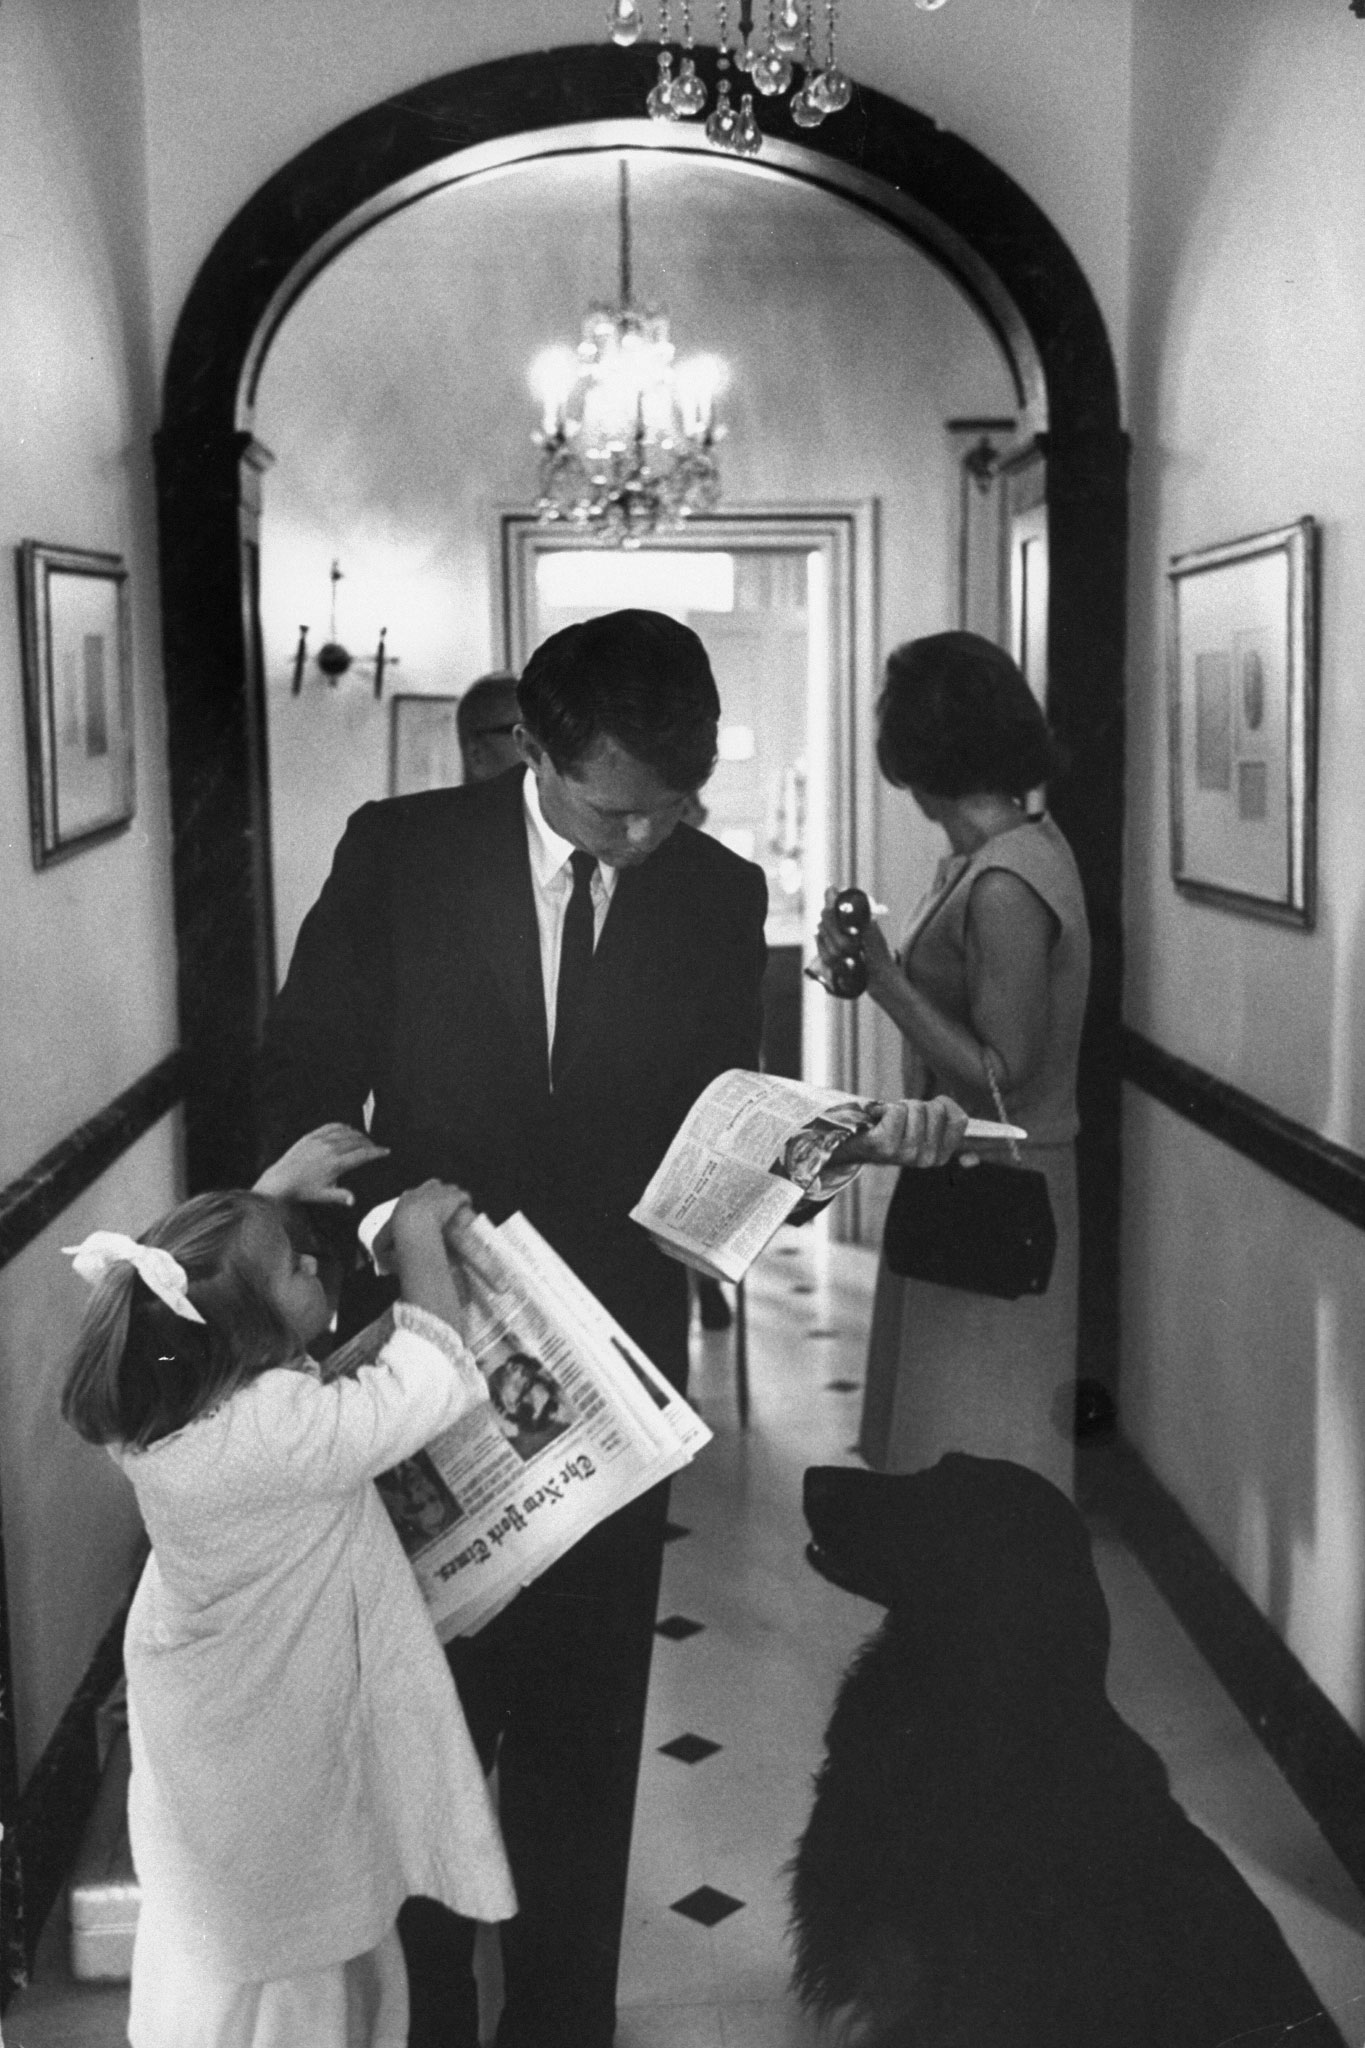 On his way to the office, Kennedy stands in hall at Hickory Hill with wife, Ethel, scanning the headlines while his daughter Kerry, 4, tugs for a goodbye kiss.